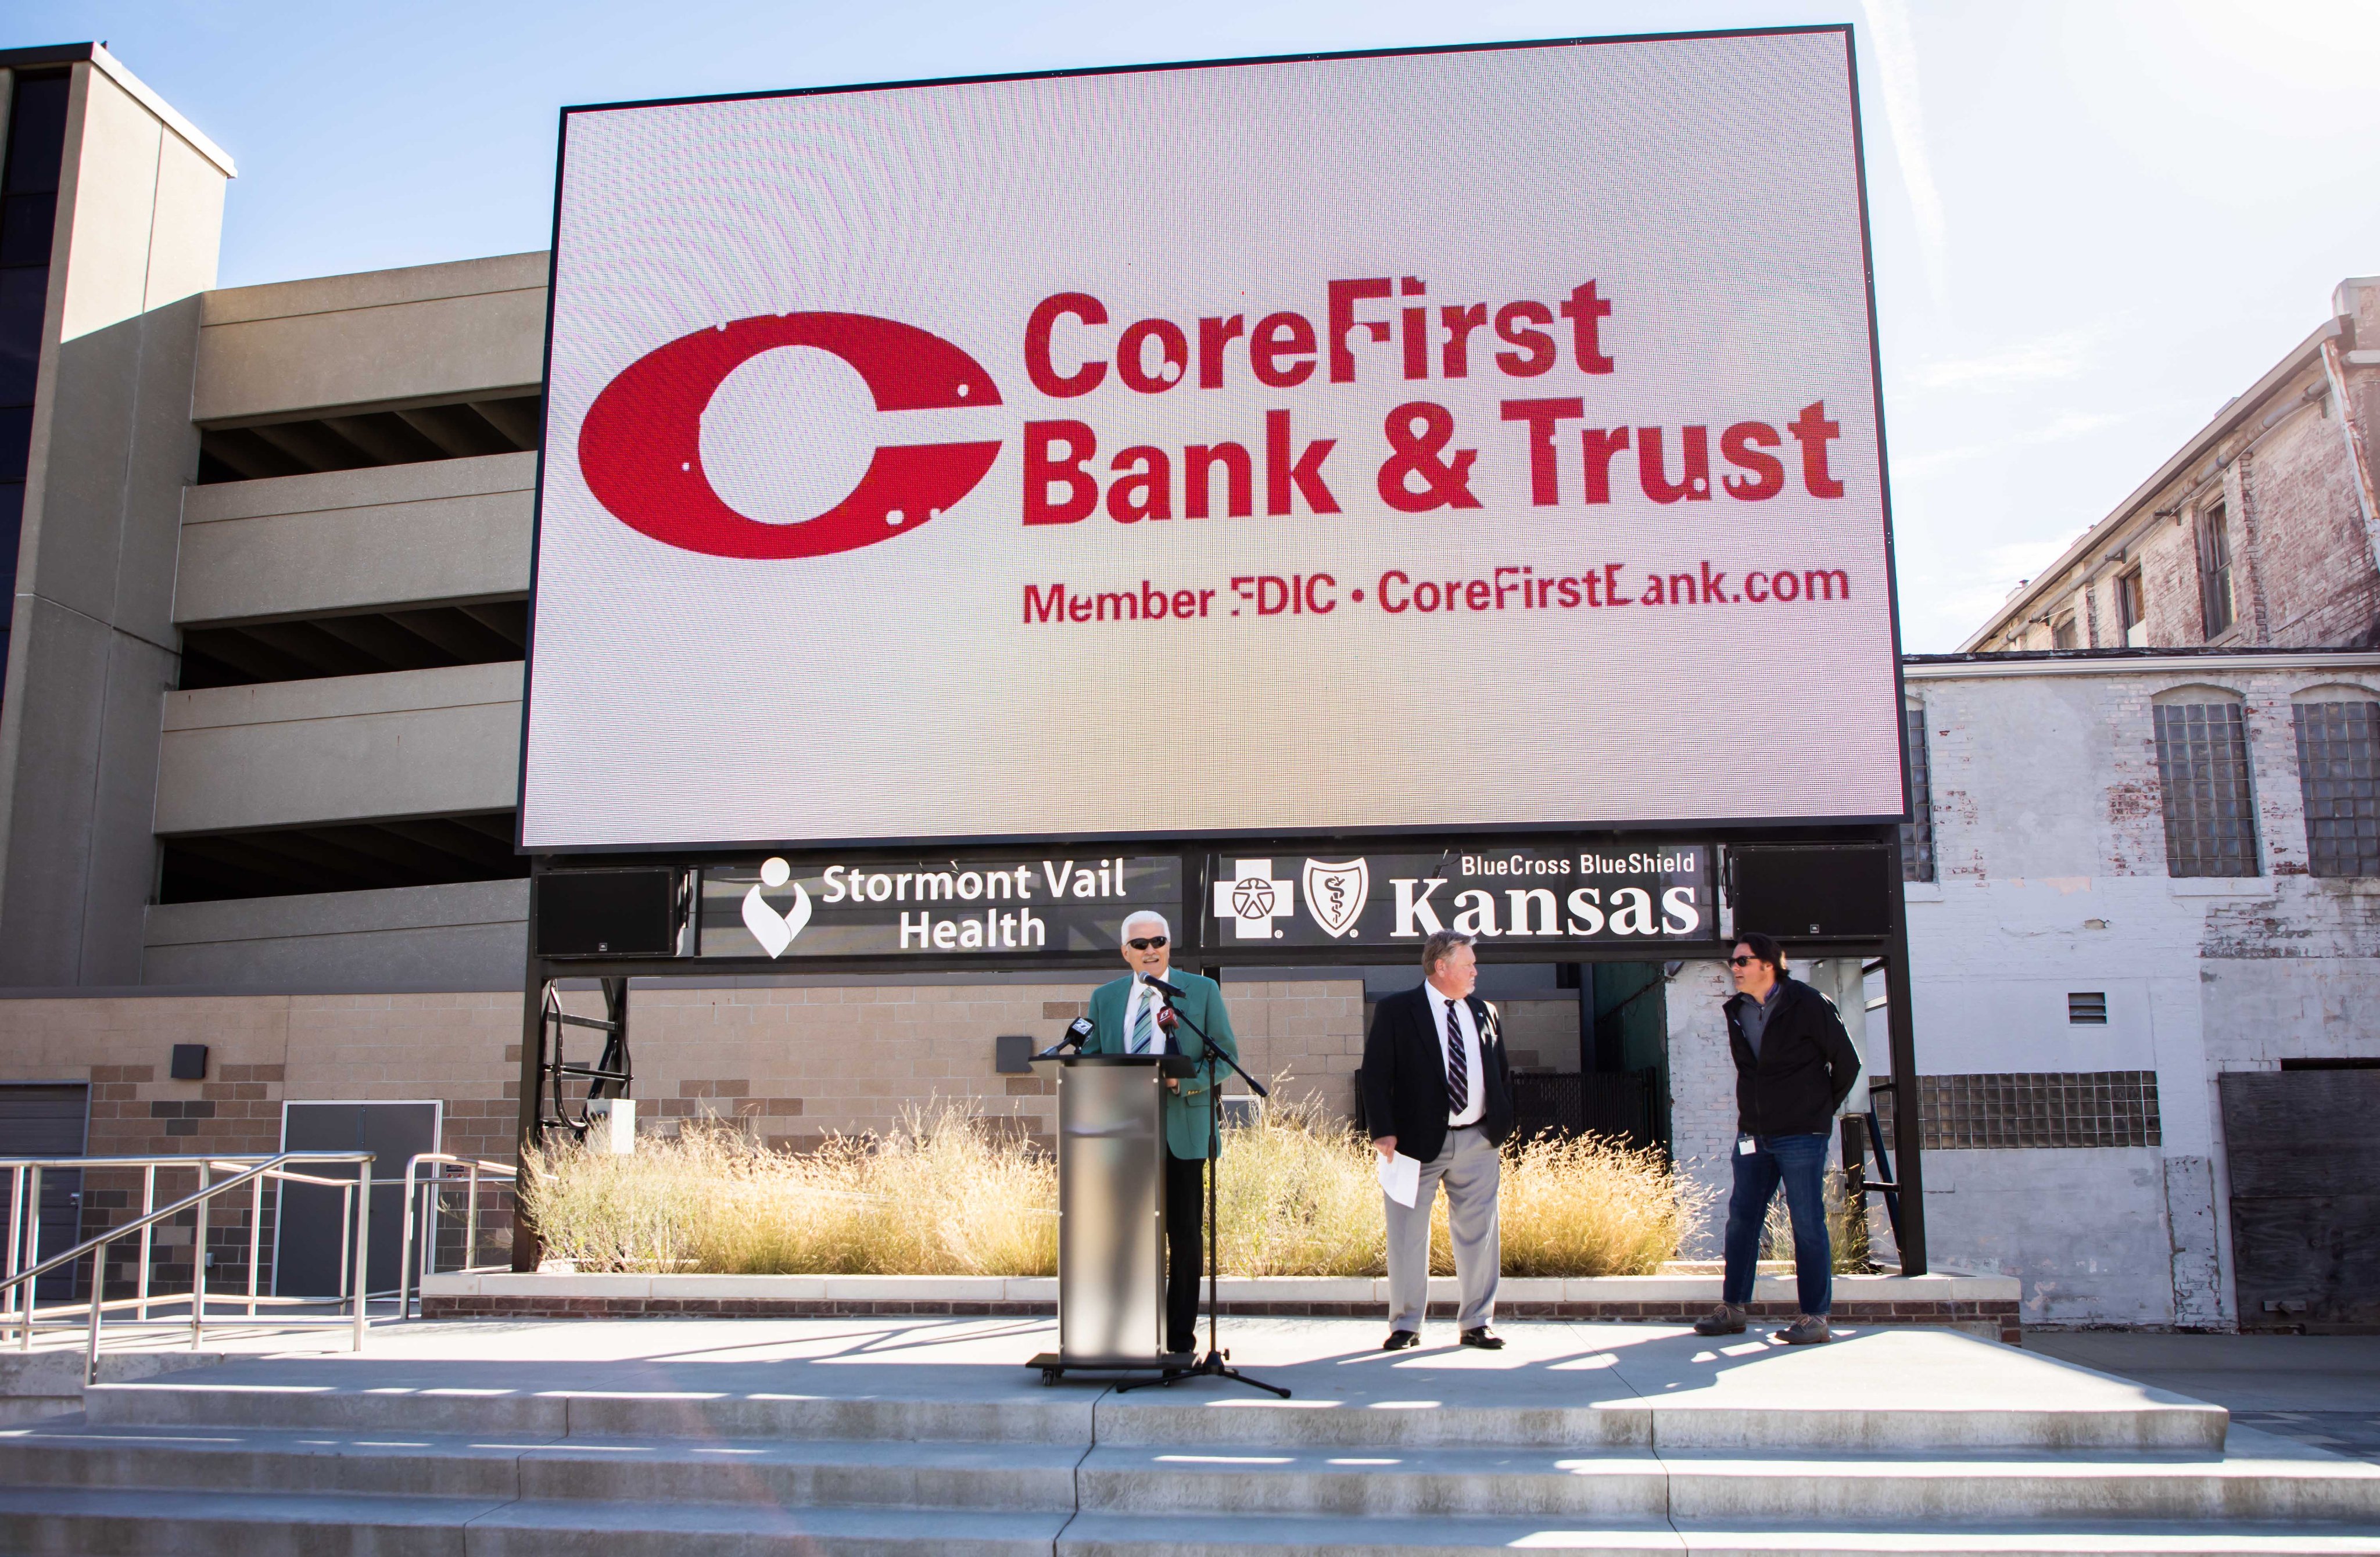 City of Topeka on X: This morning, @EvergyPlaza and @corefirst